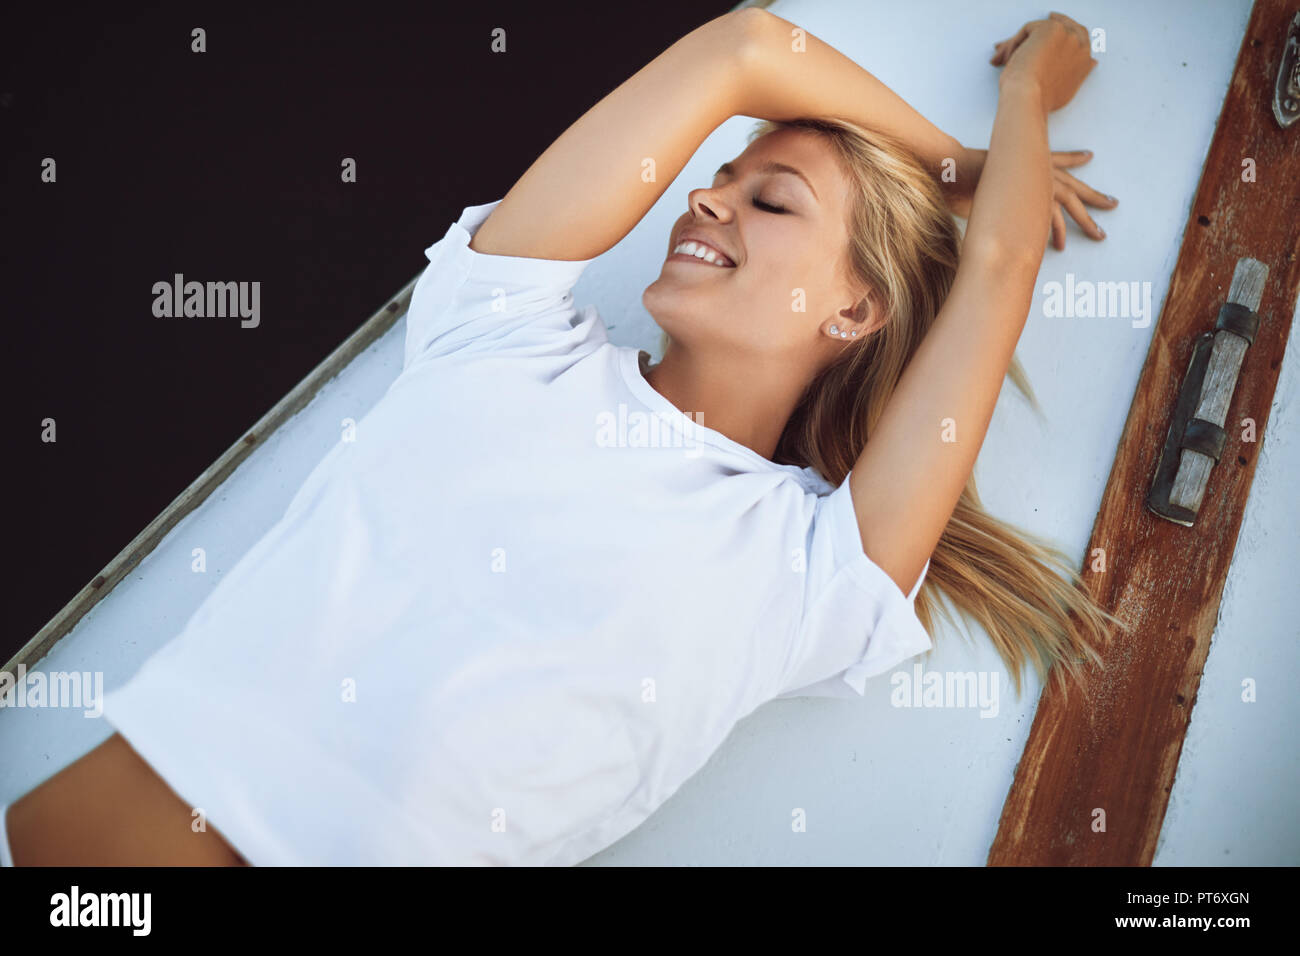 Attractive young woman in a bikini bottom and shirt lying with her eyes closed on the deck of a yacht catching a suntan Stock Photo